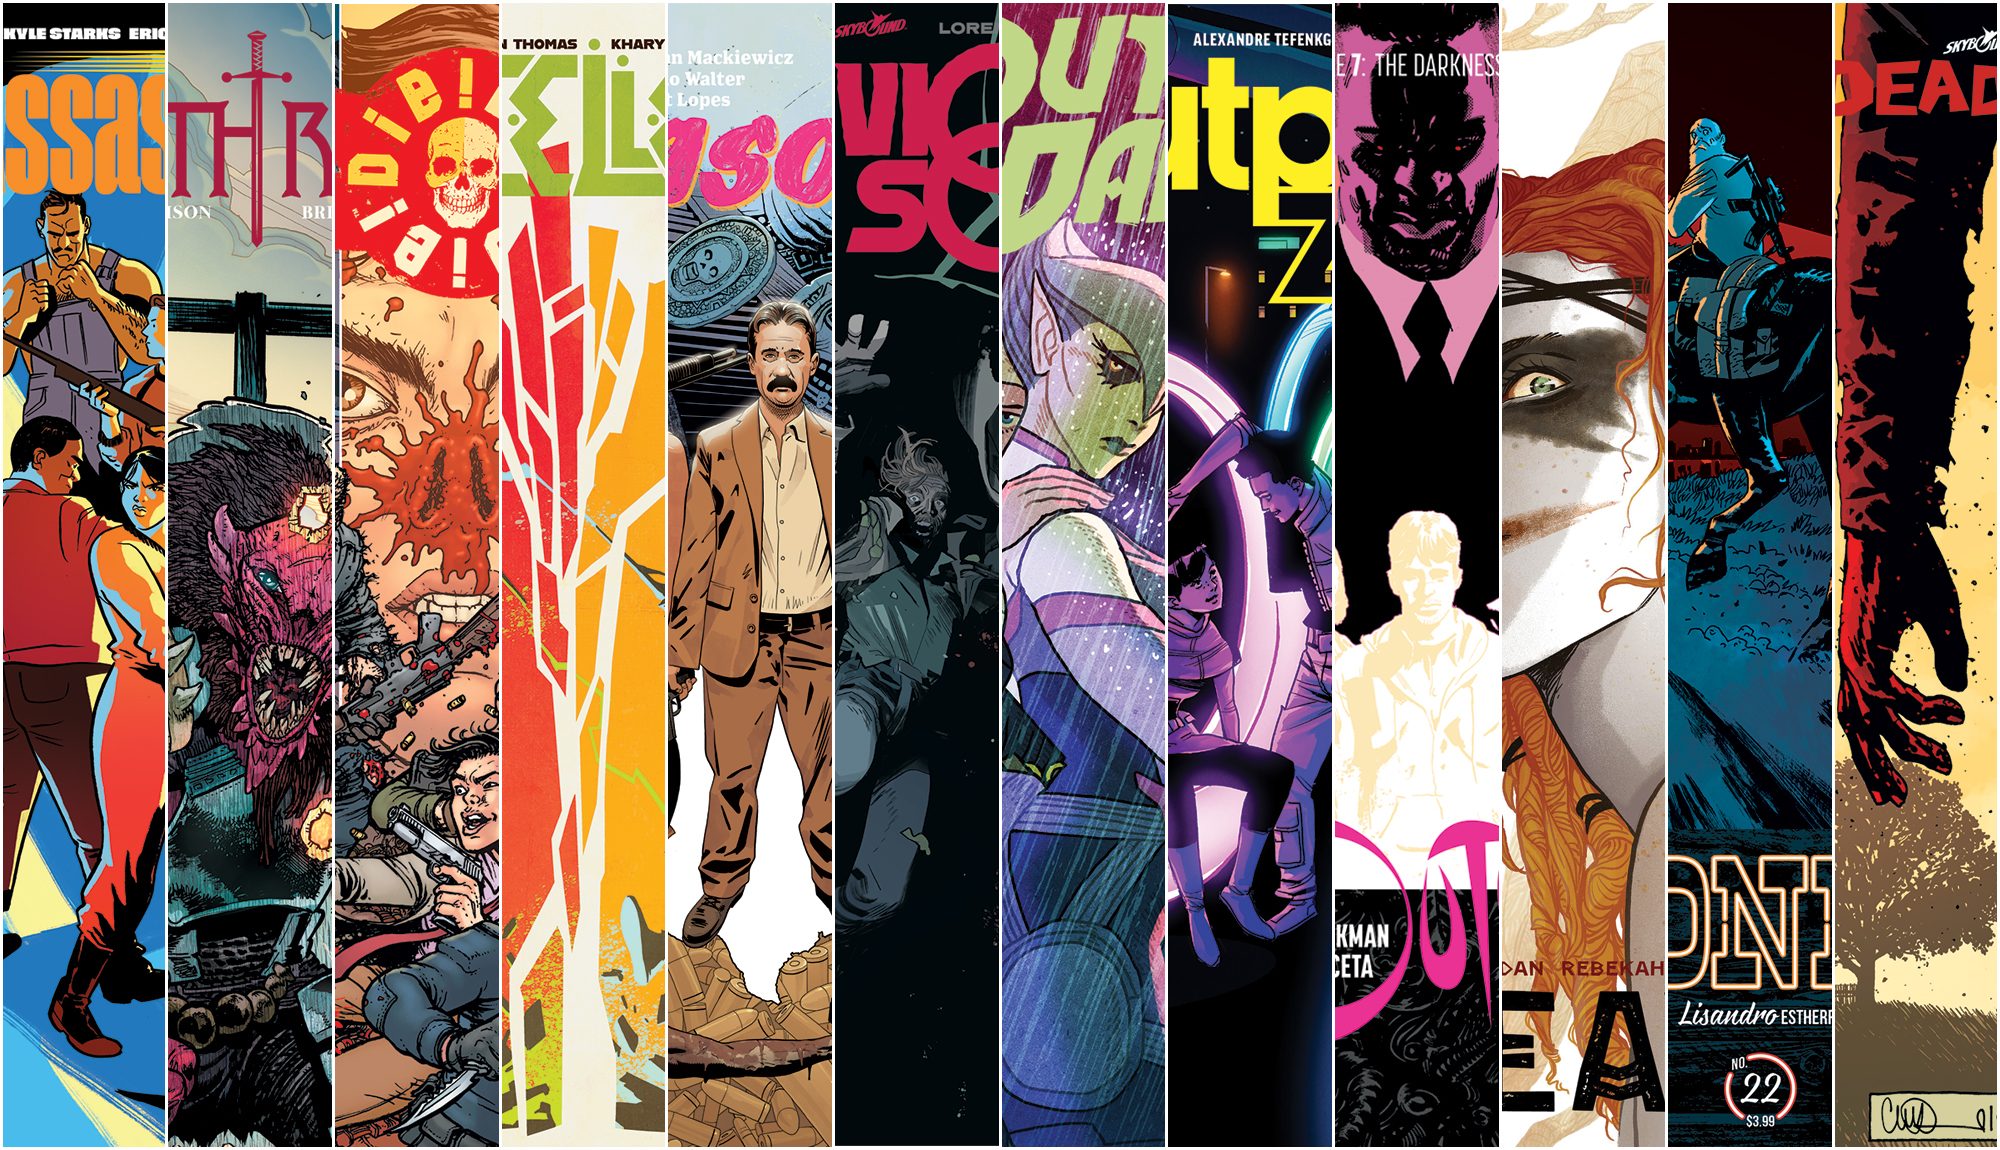 July 2019 Skybound Solicits! Books Announced!